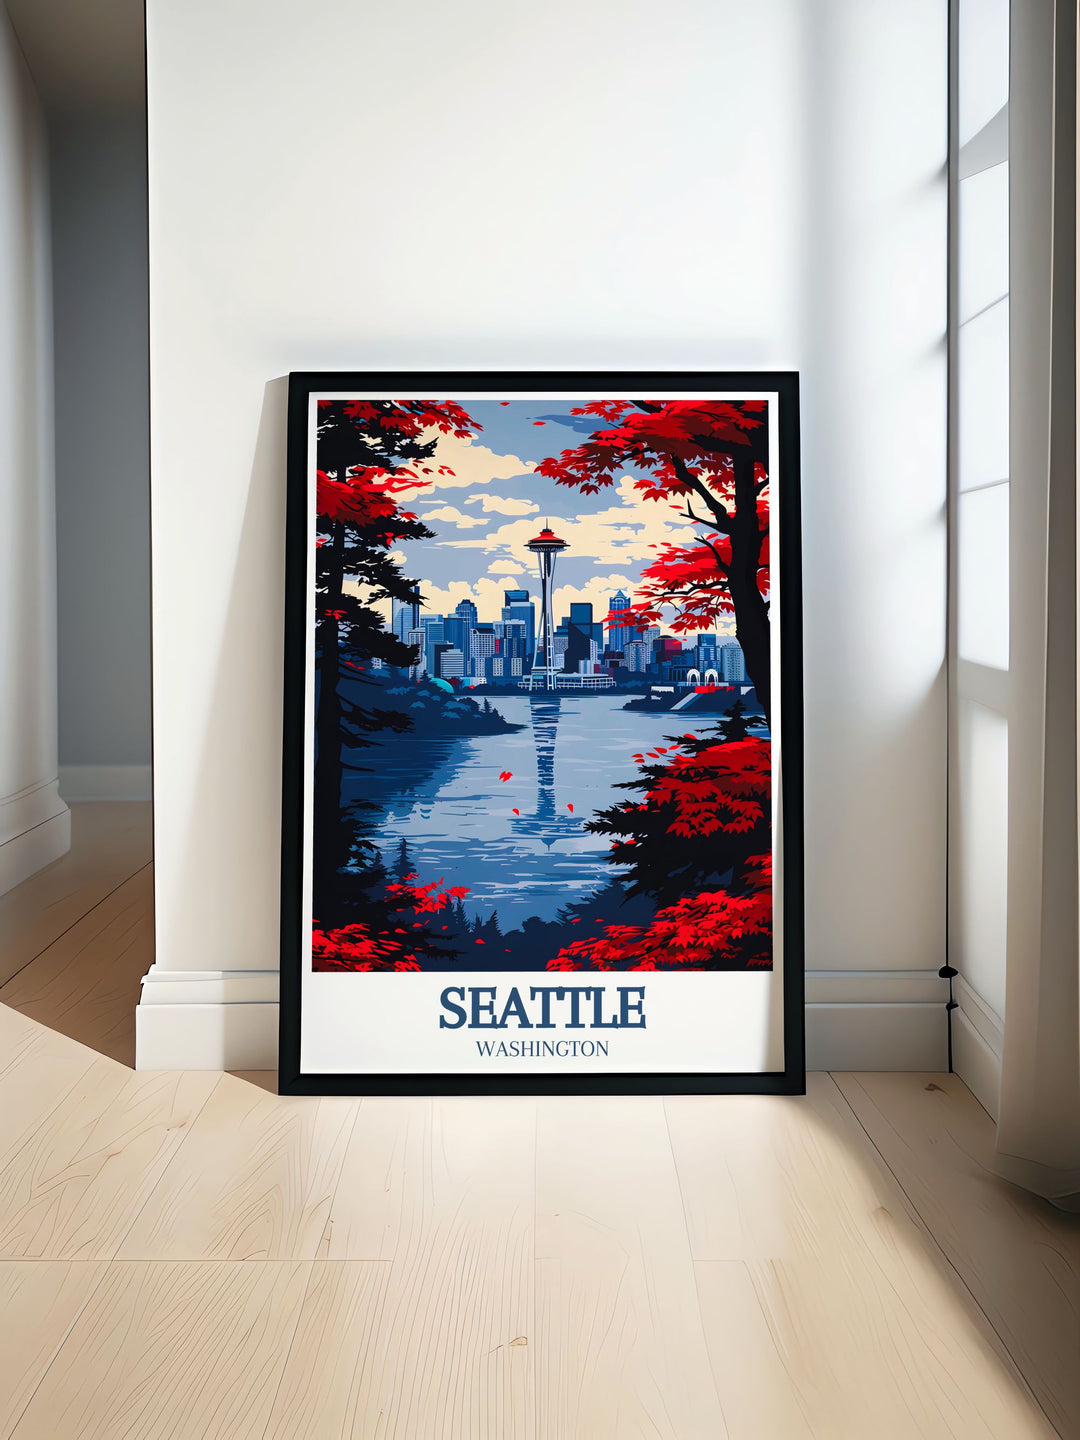 Experience the thrill of skiing at the Summit at Snoqualmie and the breathtaking views of the Seattle skyline with this detailed poster, highlighting the scenic beauty of Washington State and its renowned landmarks, ideal for any ski resort themed home decor.